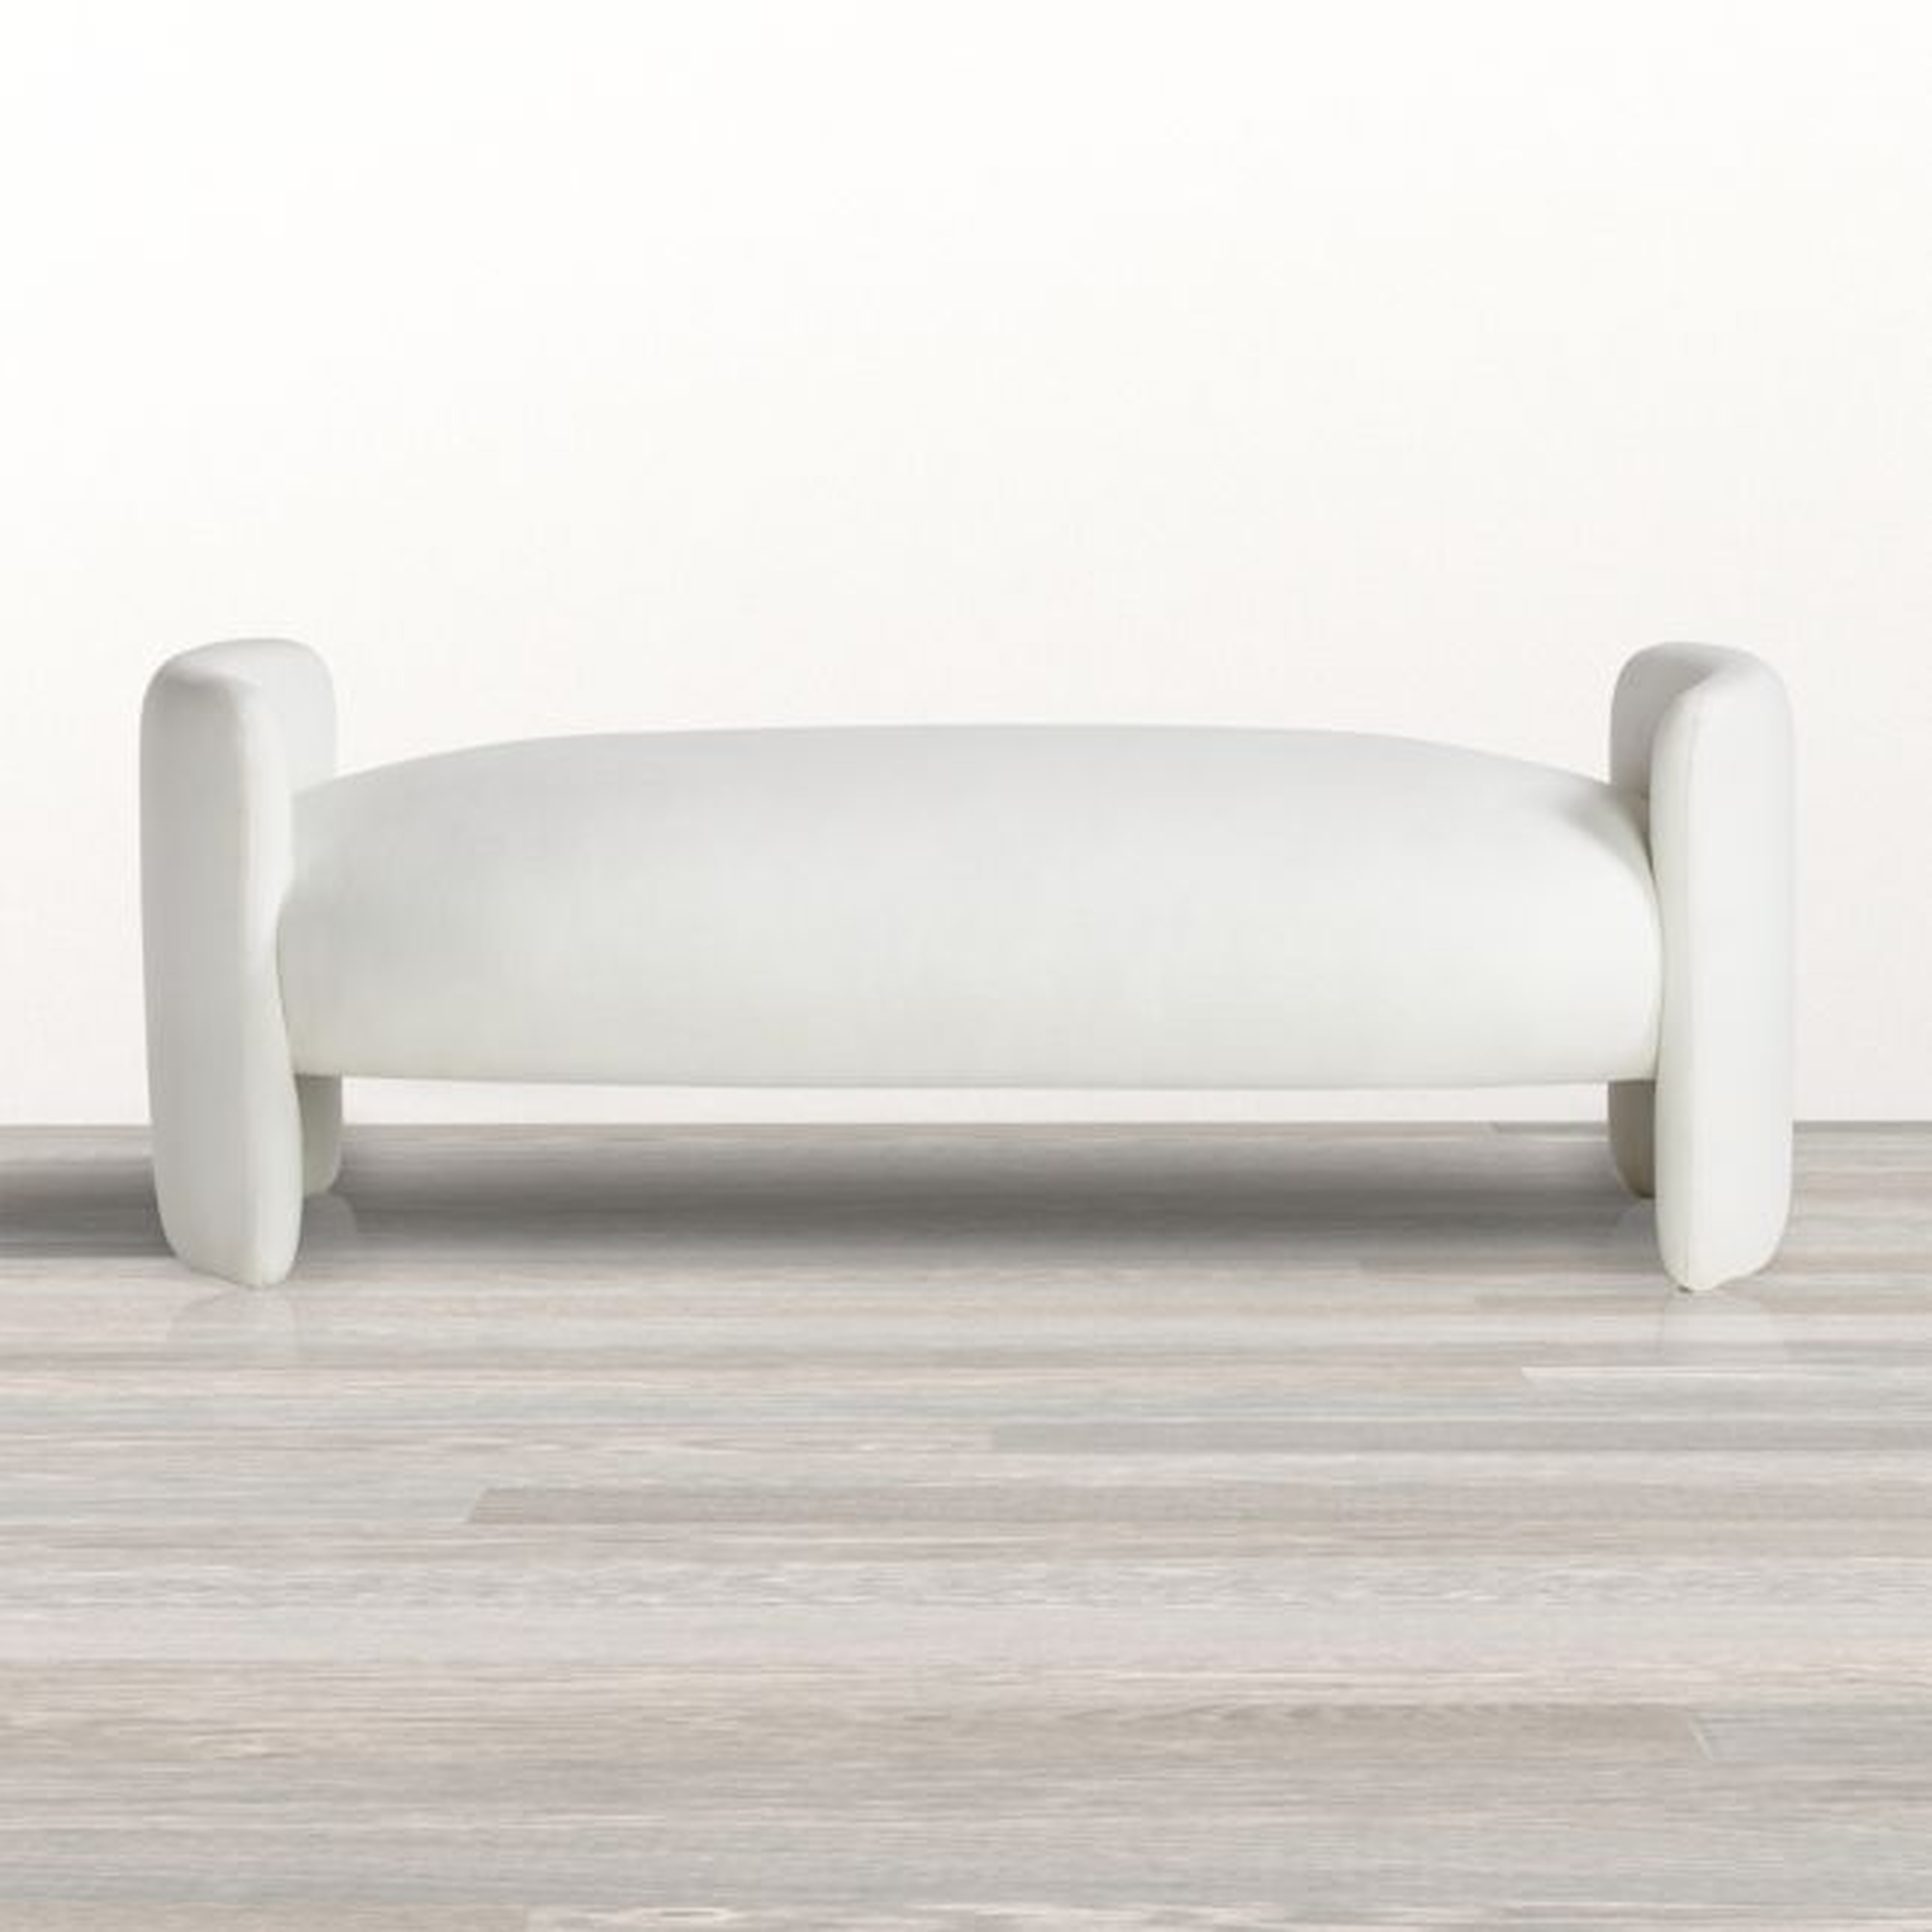 Lyon Bench by Leanne Ford - Crate and Barrel